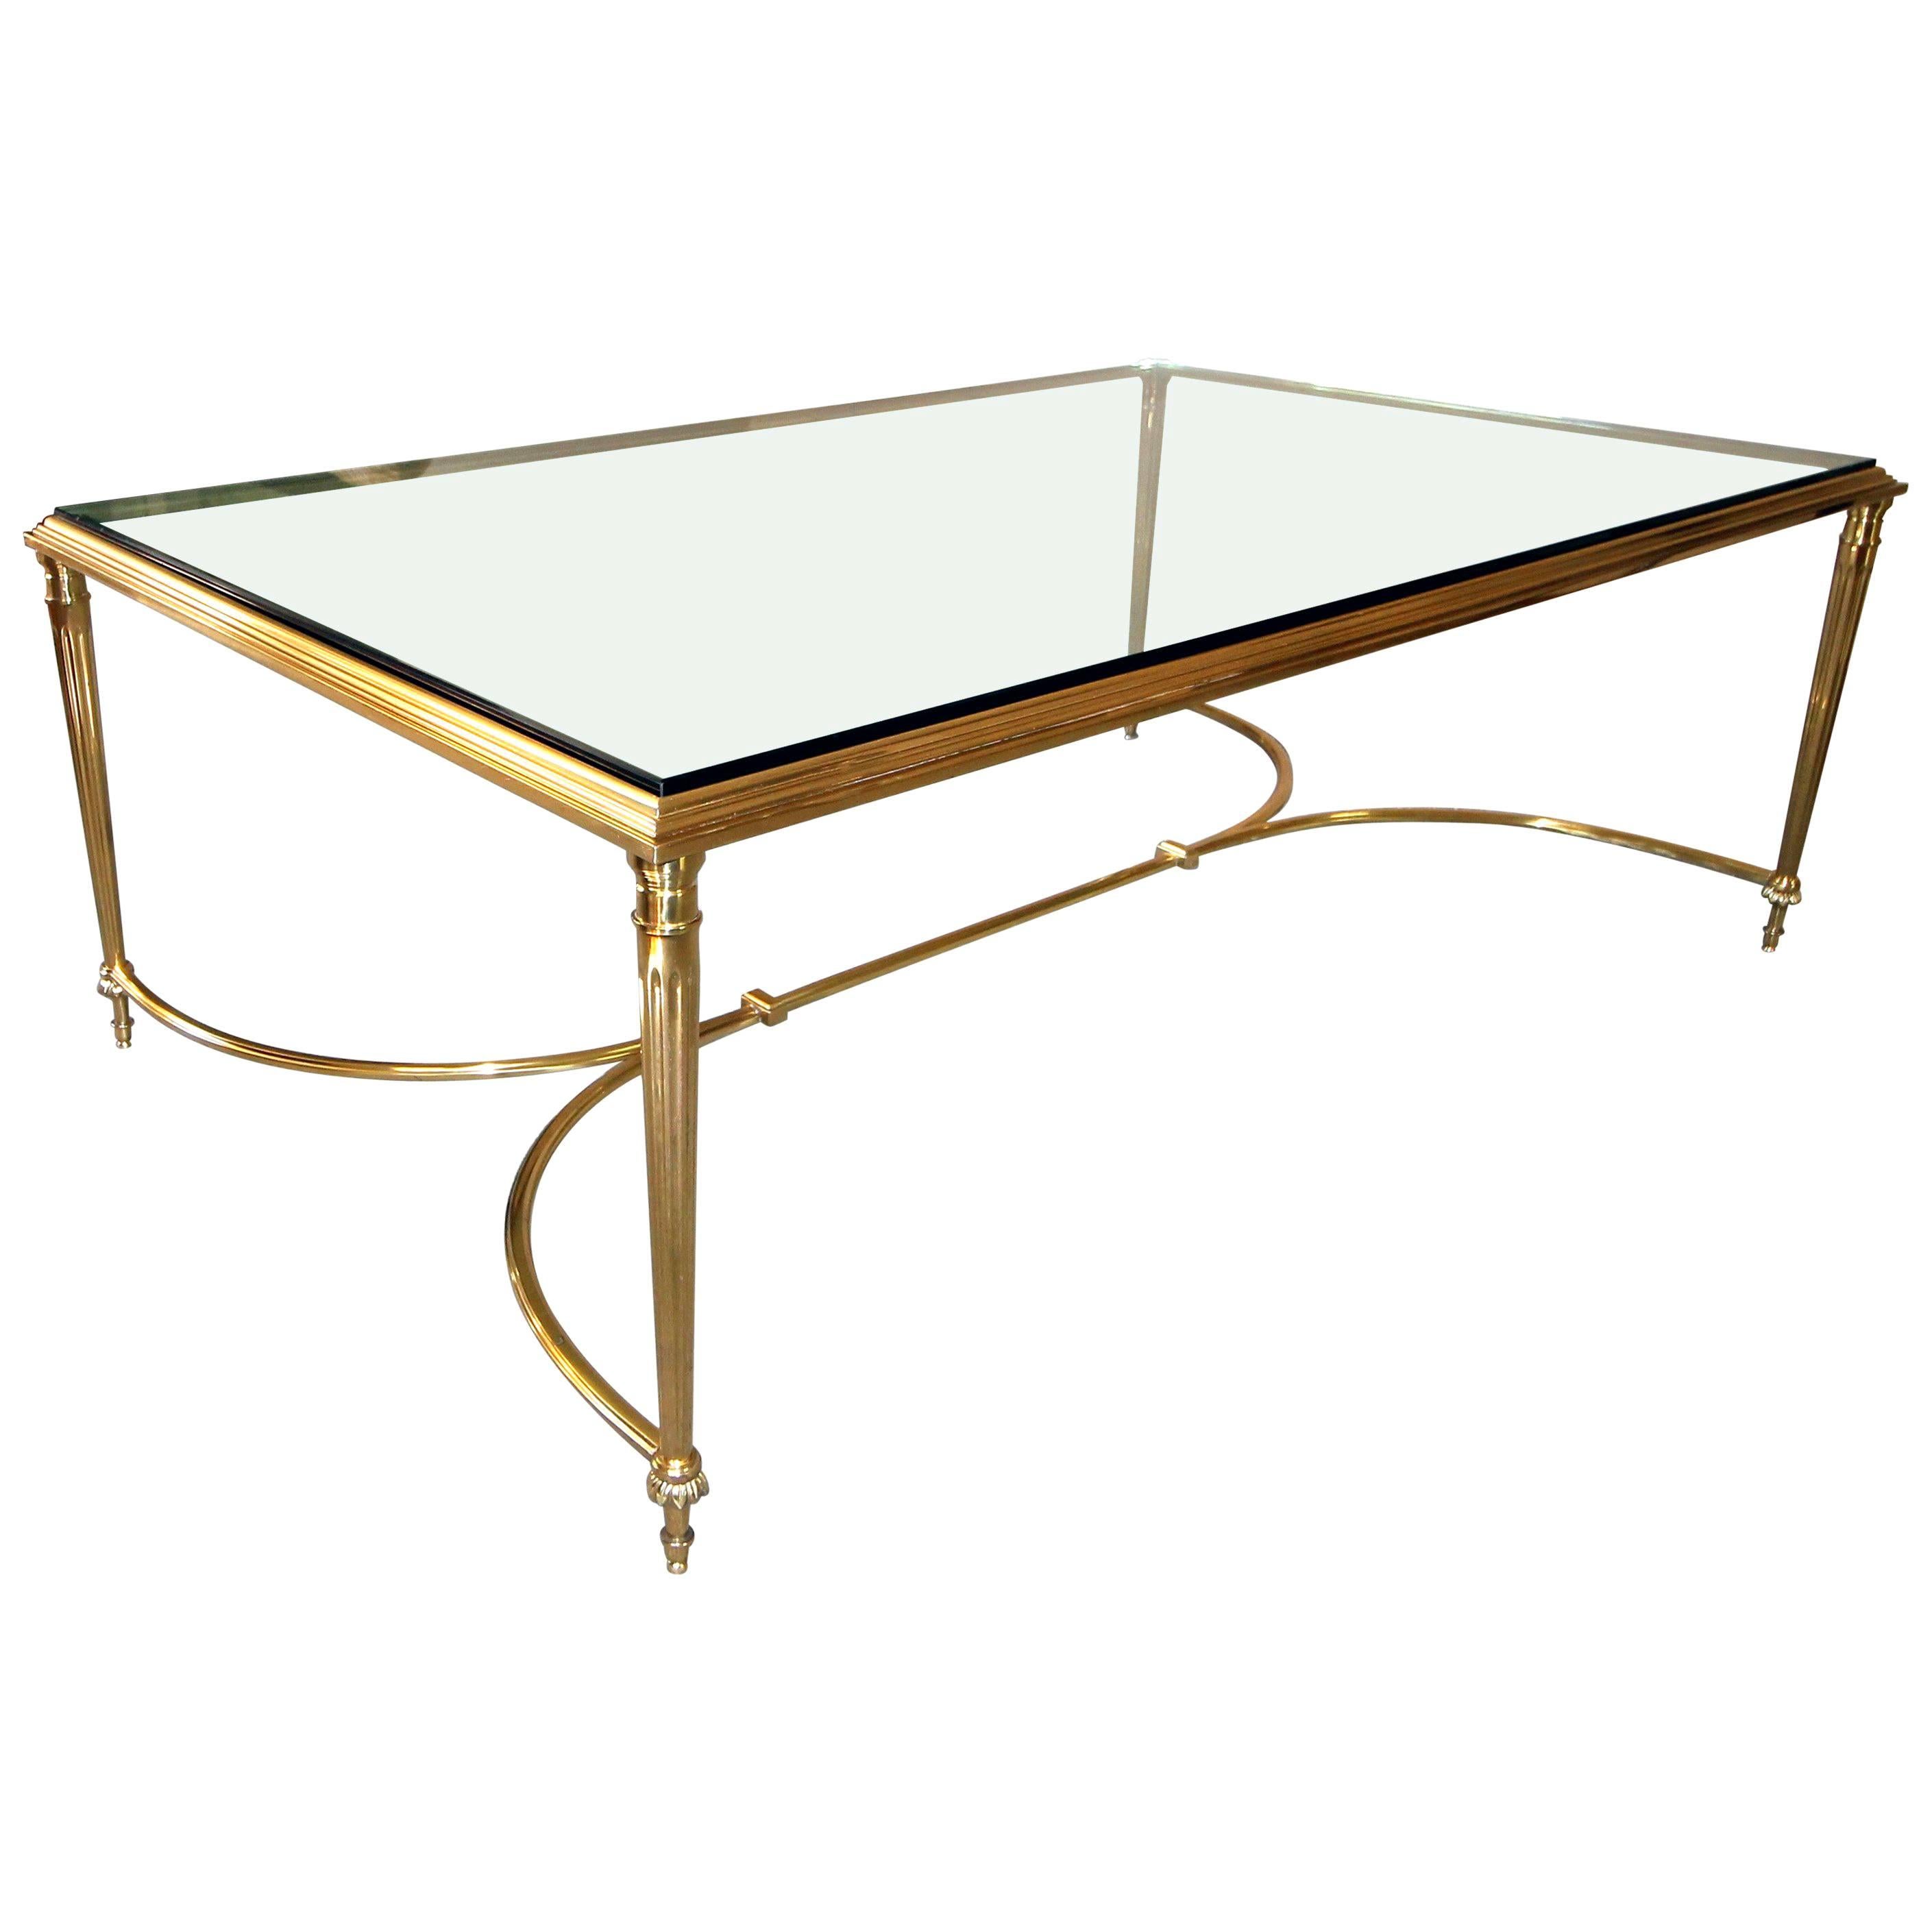 Large French Louis XVI Neoclassic Style Solid Brass Coffee or Cocktail Table